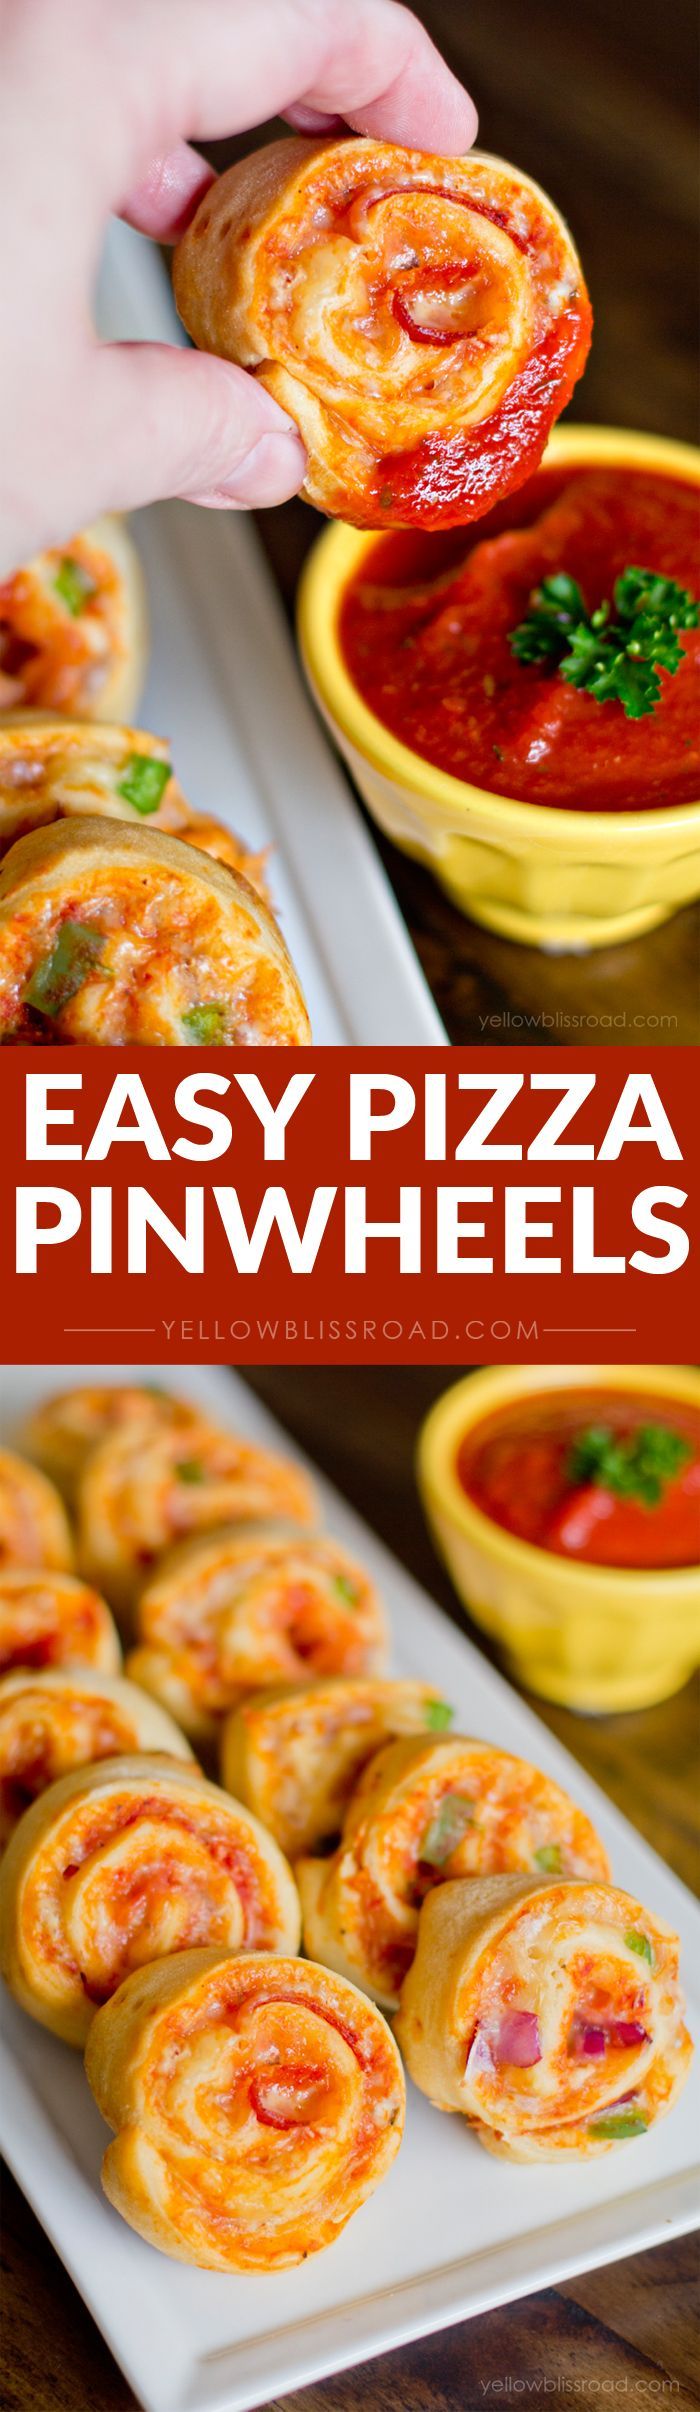 Pizza Pinwheels are so easy to make, and would be a great after school snack or finger food for a party or get together. With just